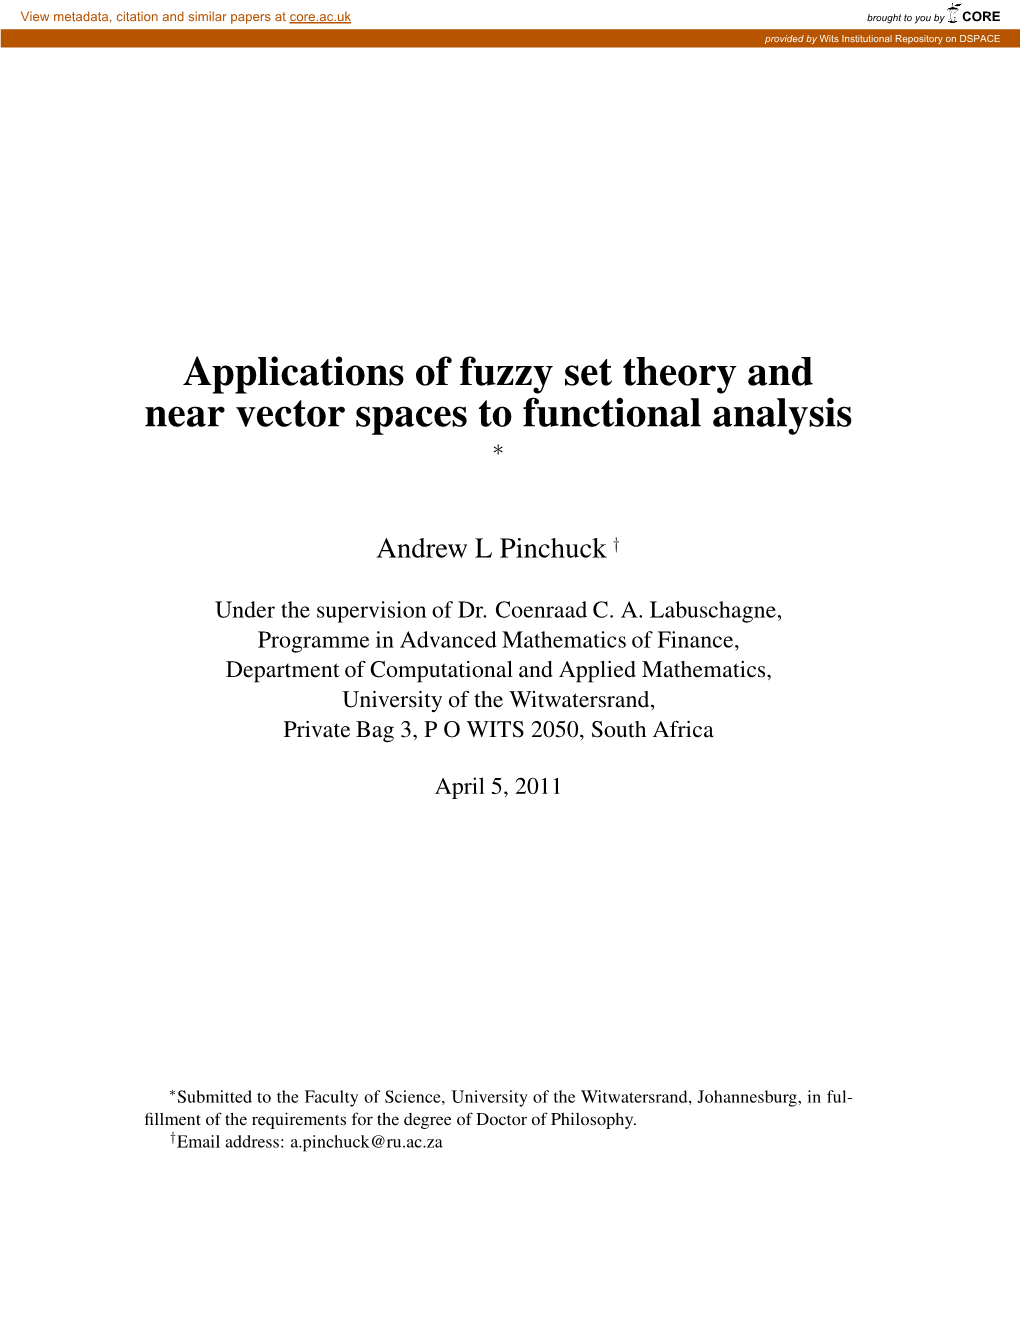 Applications of Fuzzy Set Theory and Near Vector Spaces to Functional Analysis ∗